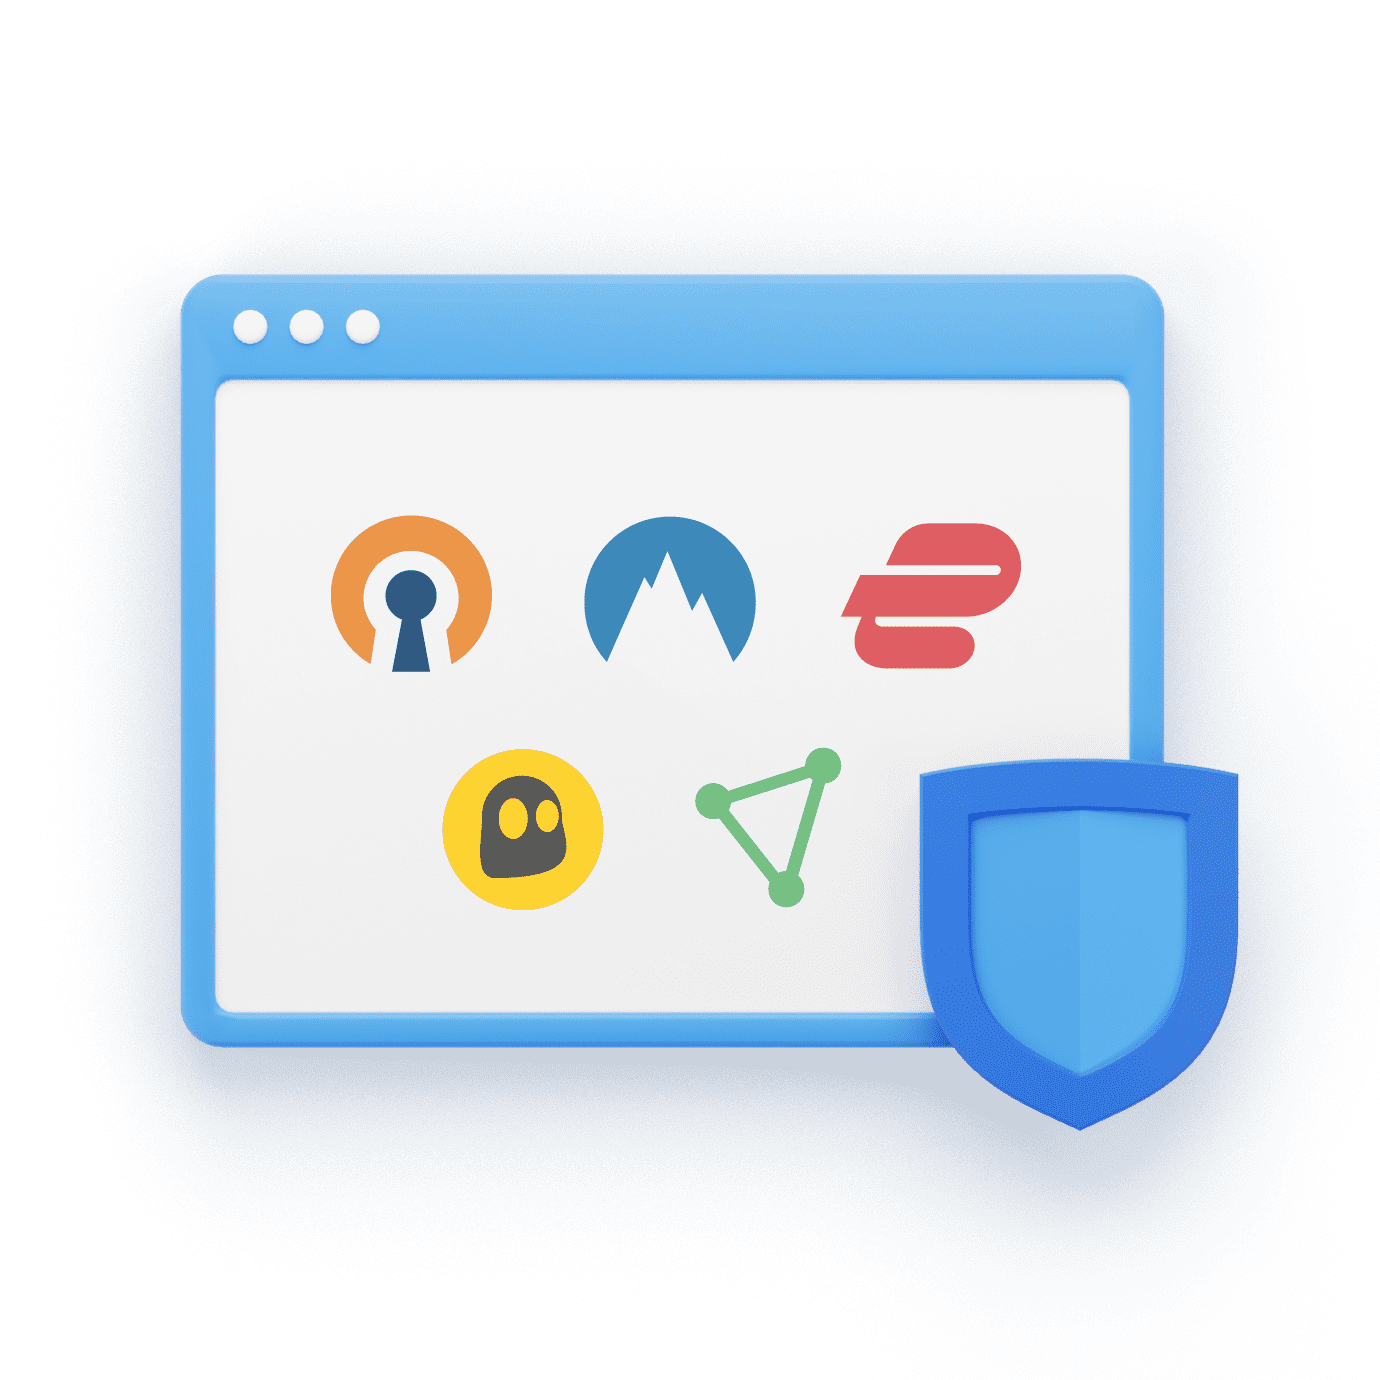 Various VPNs icons with WWPass Shield